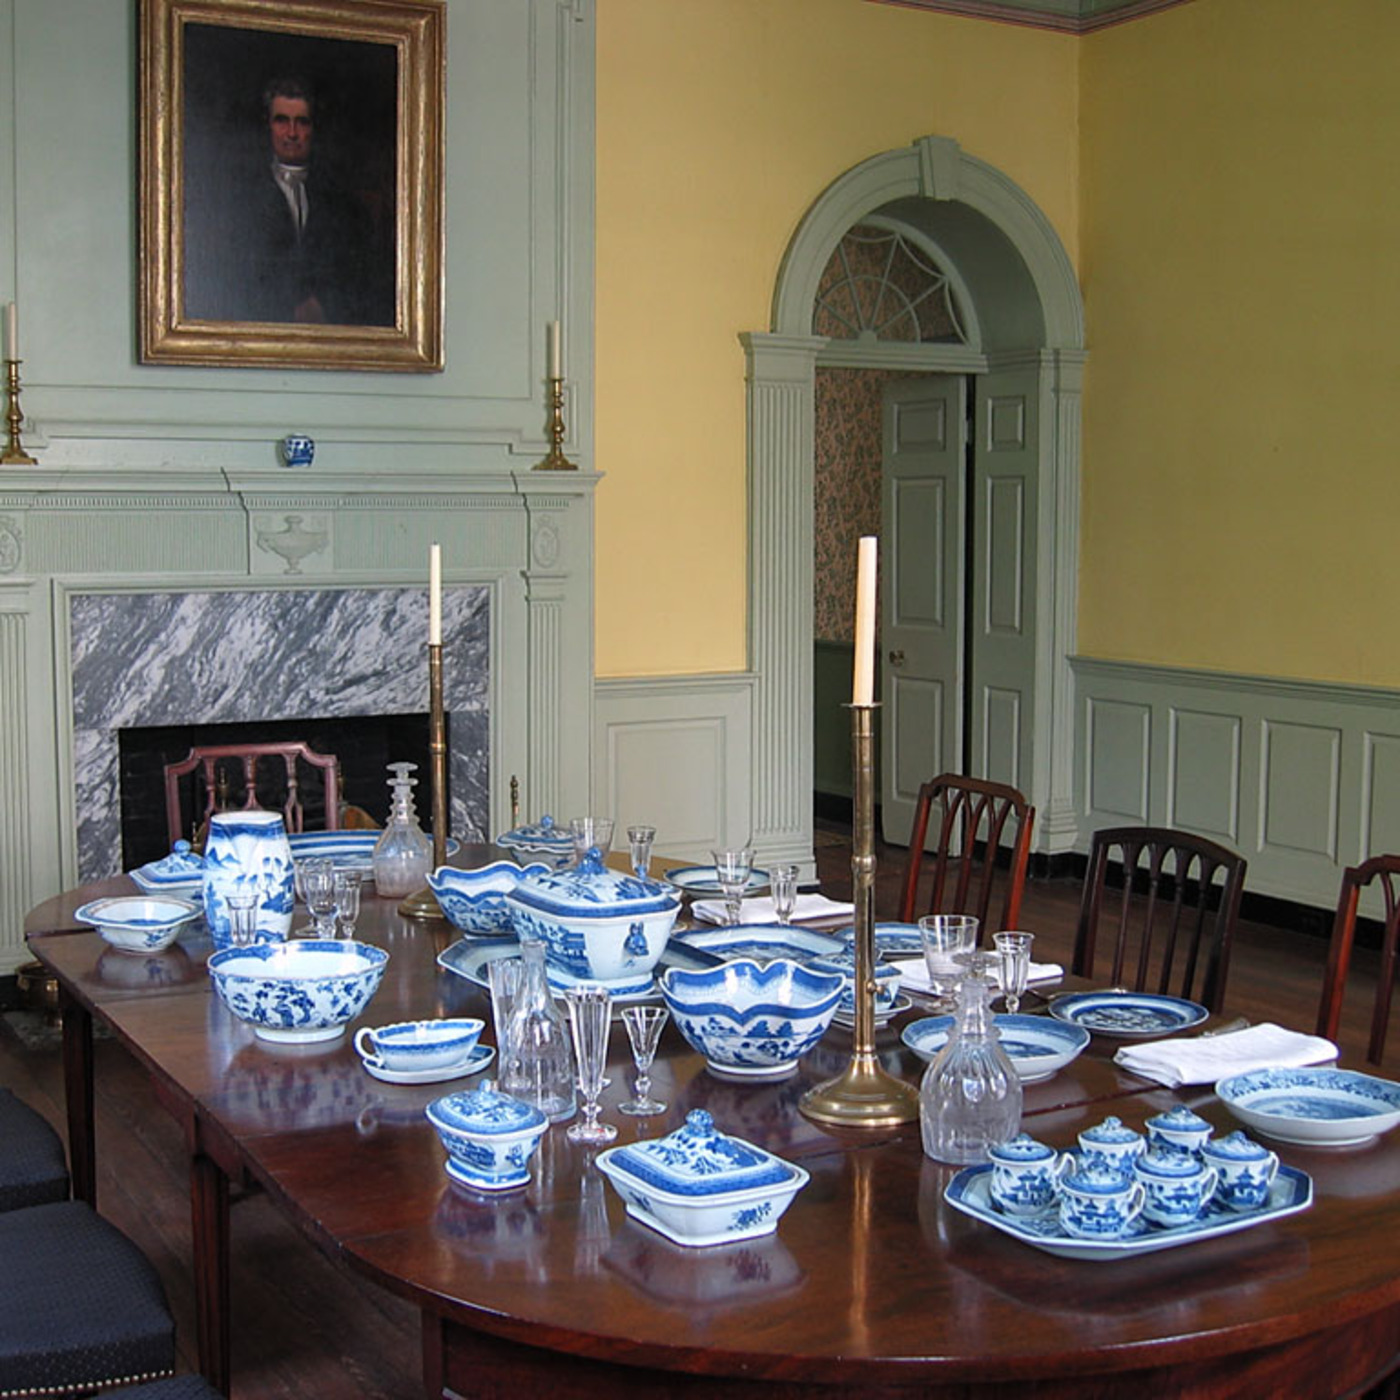 A Visit to John Marshall House, Part II